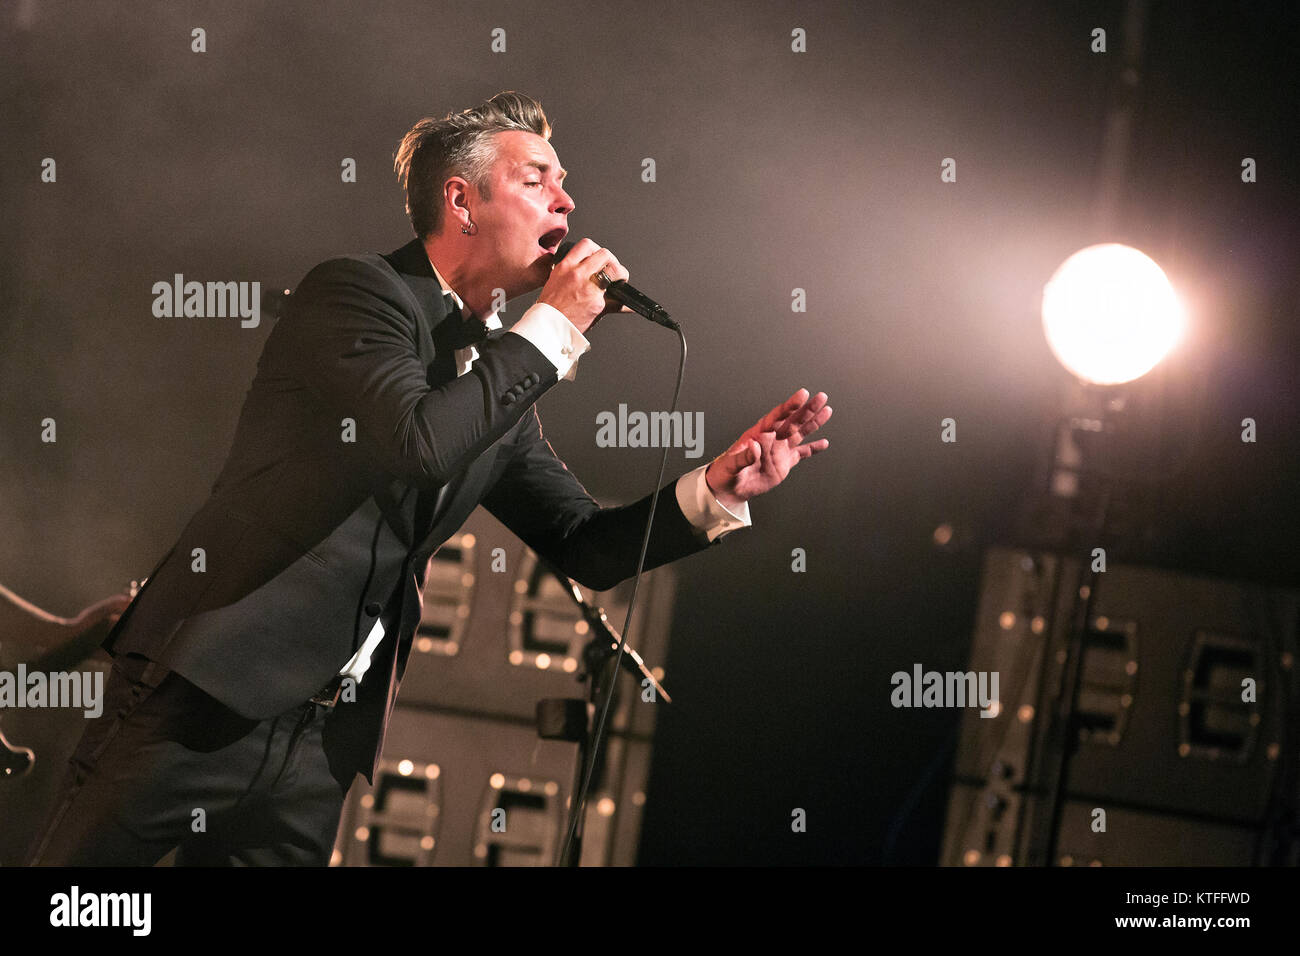 The Norwegian rock band Kaizers Orchestra performs a live concert at Den Norske Opera in Oslo. Here vocalist, songwriter and musician Janove Ottesen is seen live on stage. Norway, 27/01 2013. Stock Photo